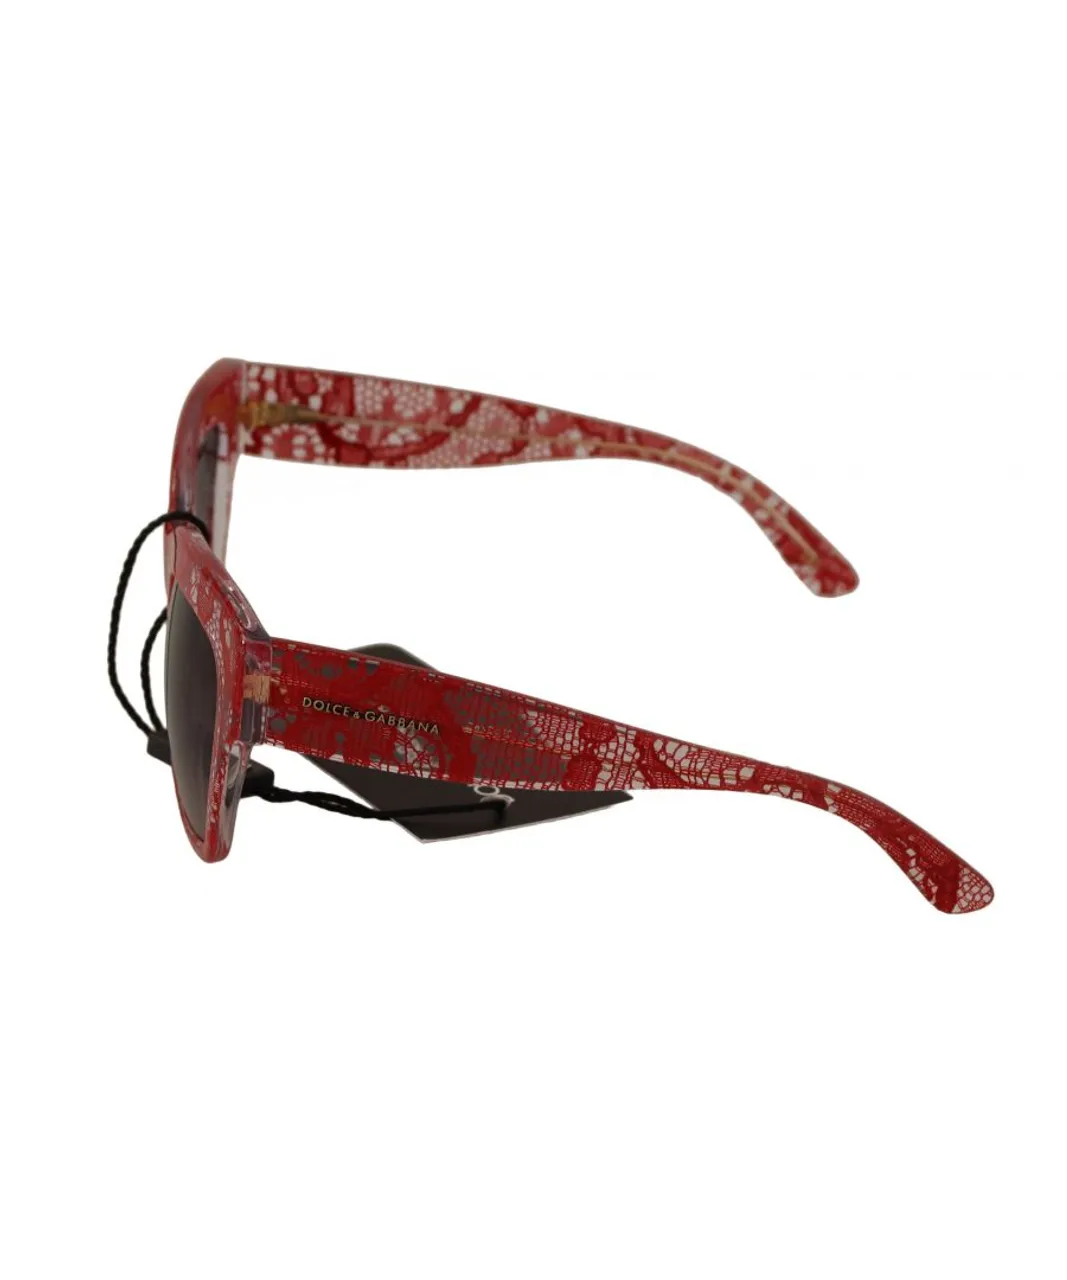 Dolce & Gabbana WoMens Red Lace Acetate Rectangle Shades Sunglasses - One